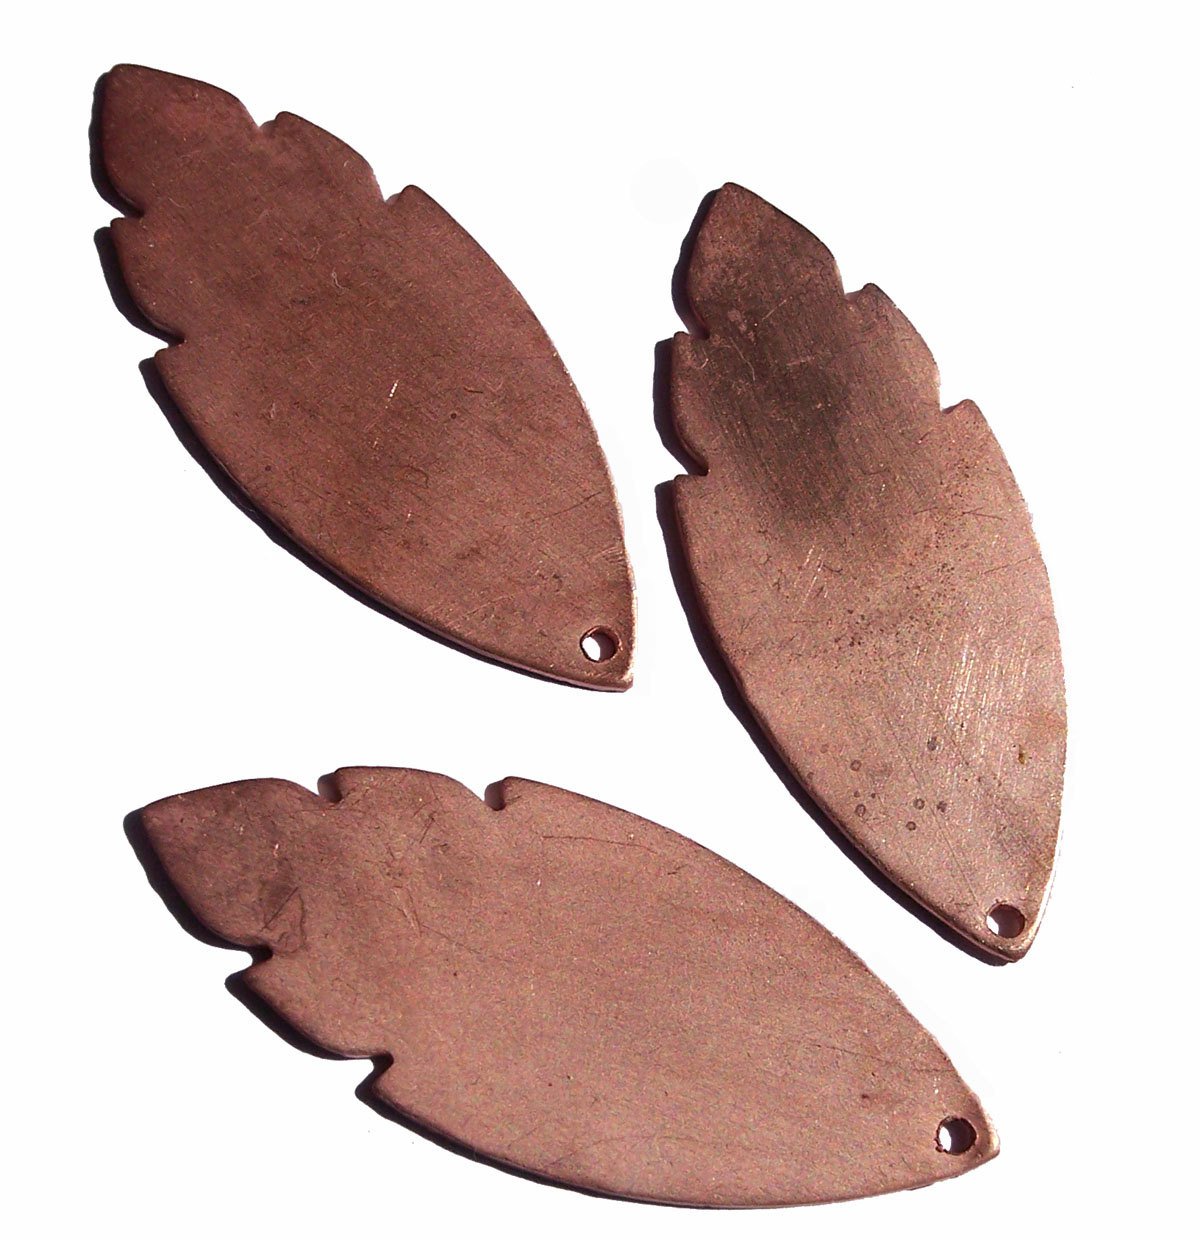 Antique Hammered Leaf 47mm x 20mm Blank Cutout for Enameling Stamping Texturing Blanks Variety of Metals